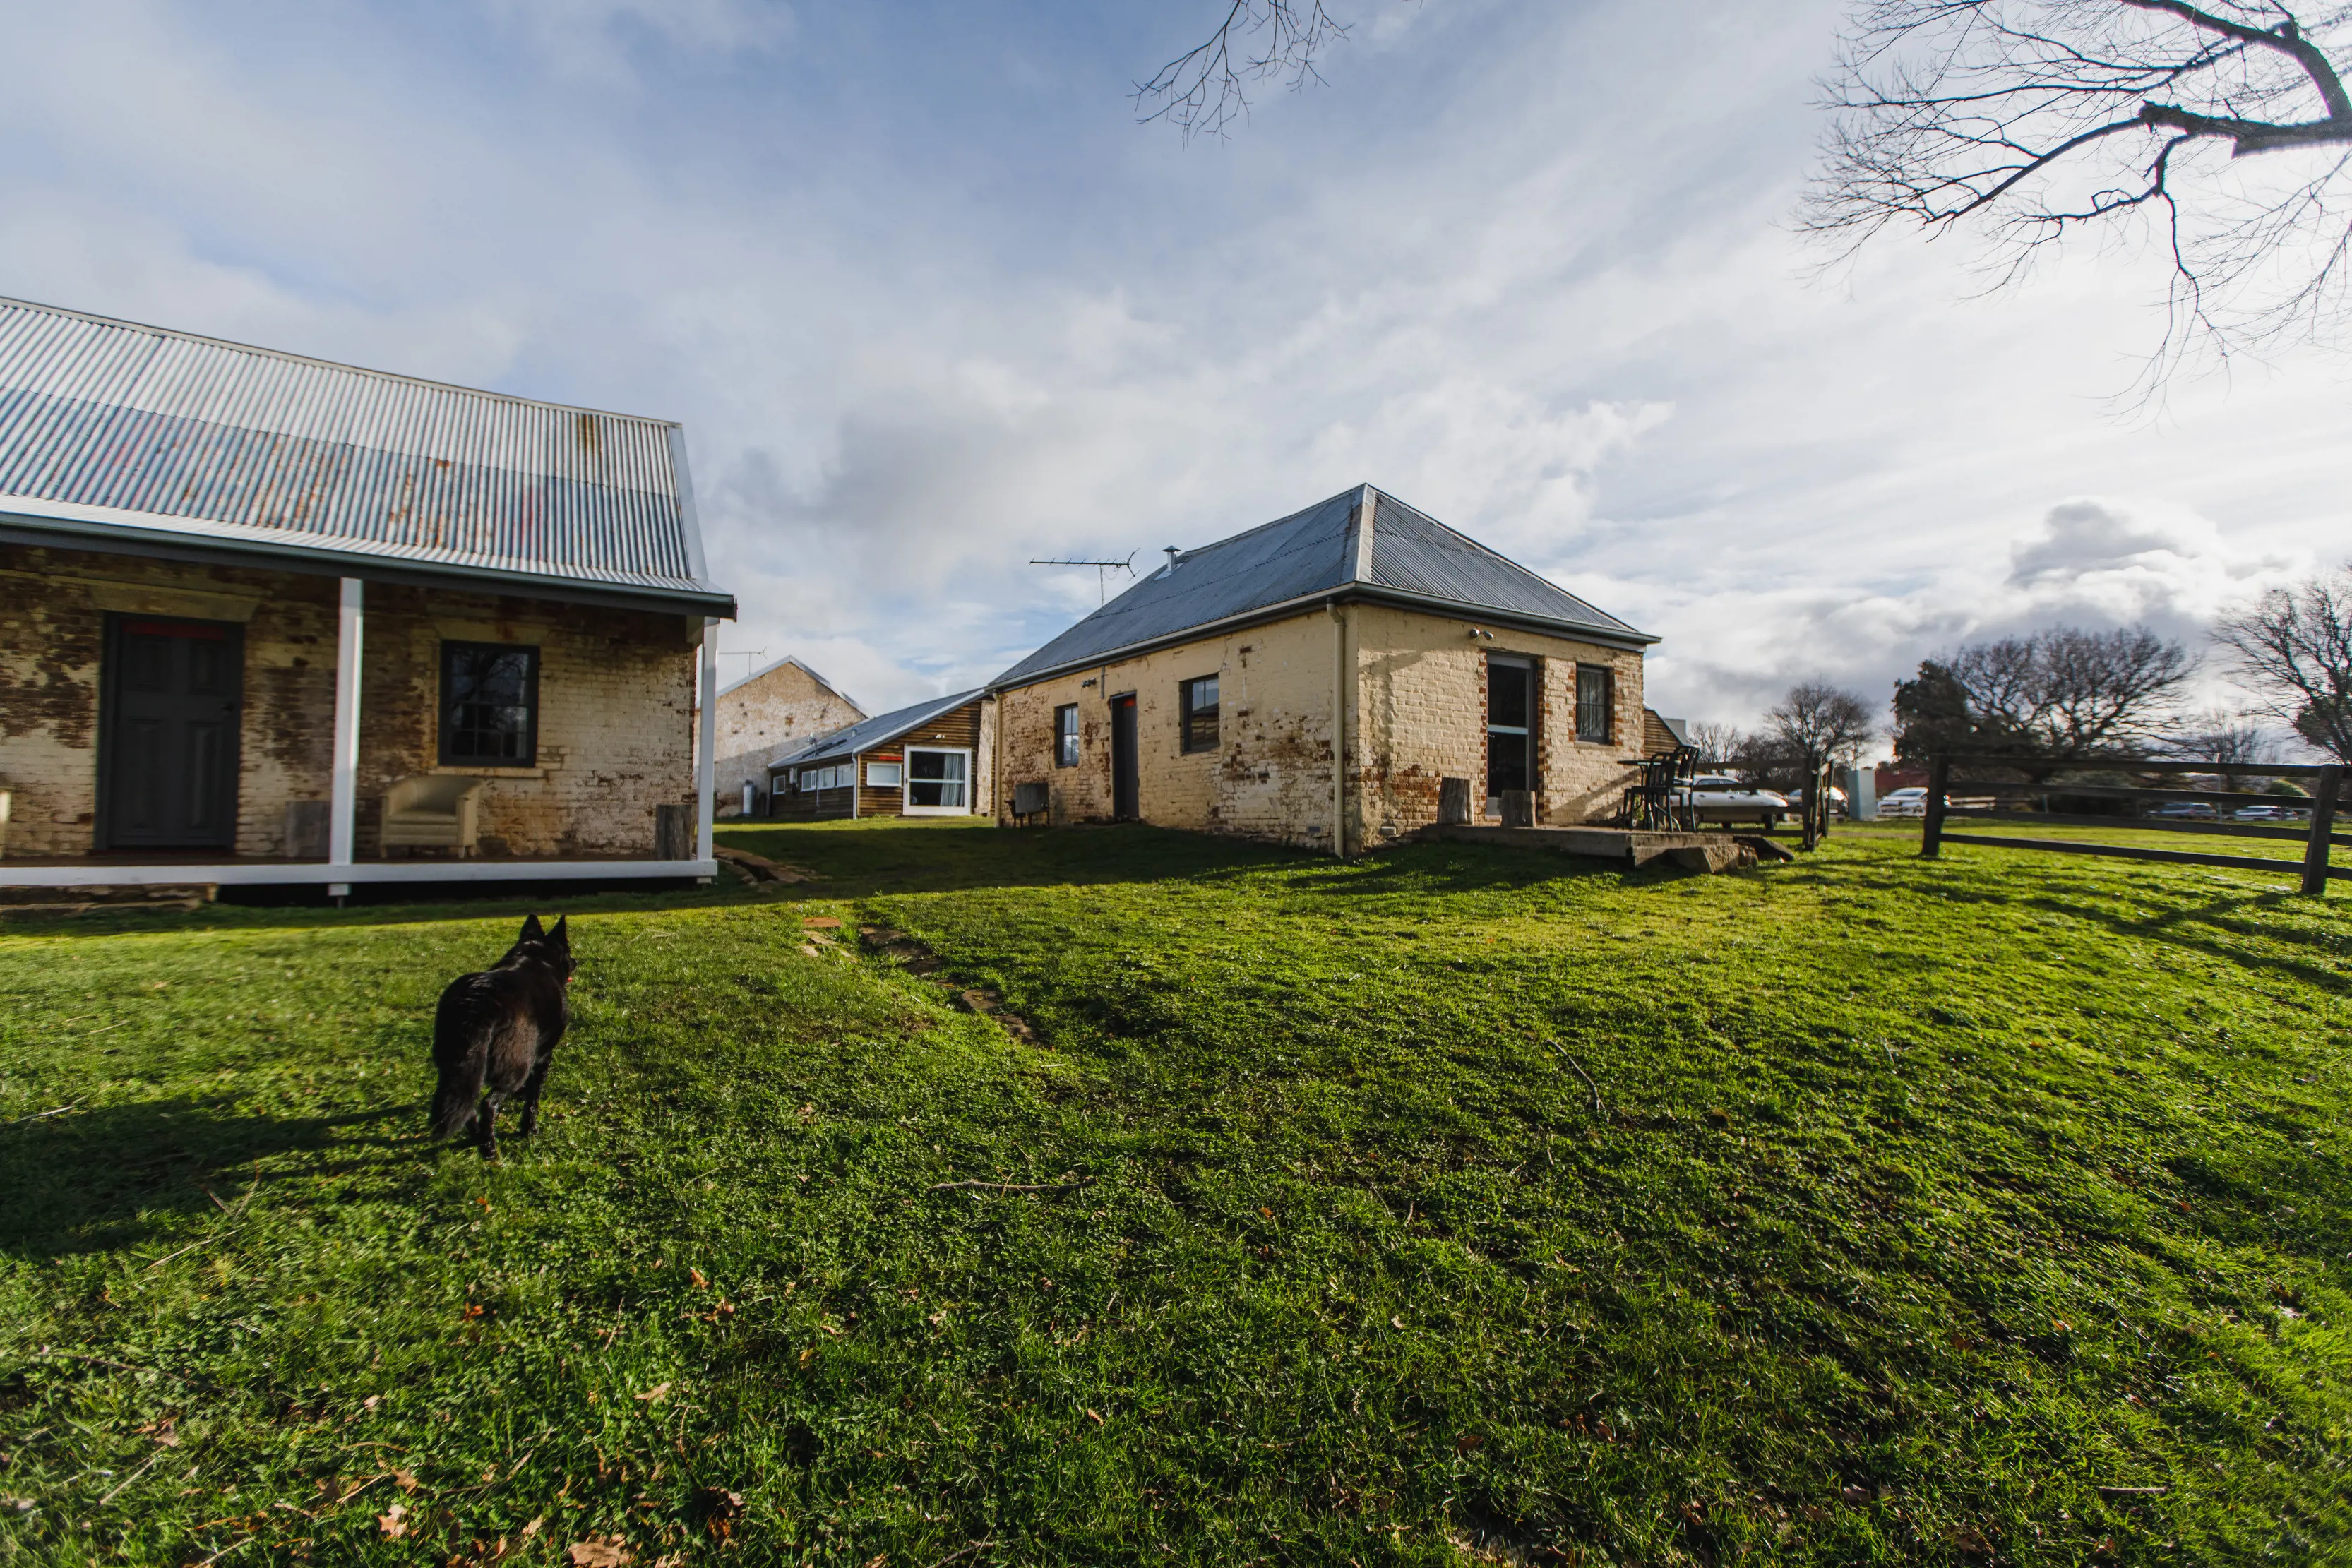 Exterior wide of Ratho Farm, with a dog in the foreground.